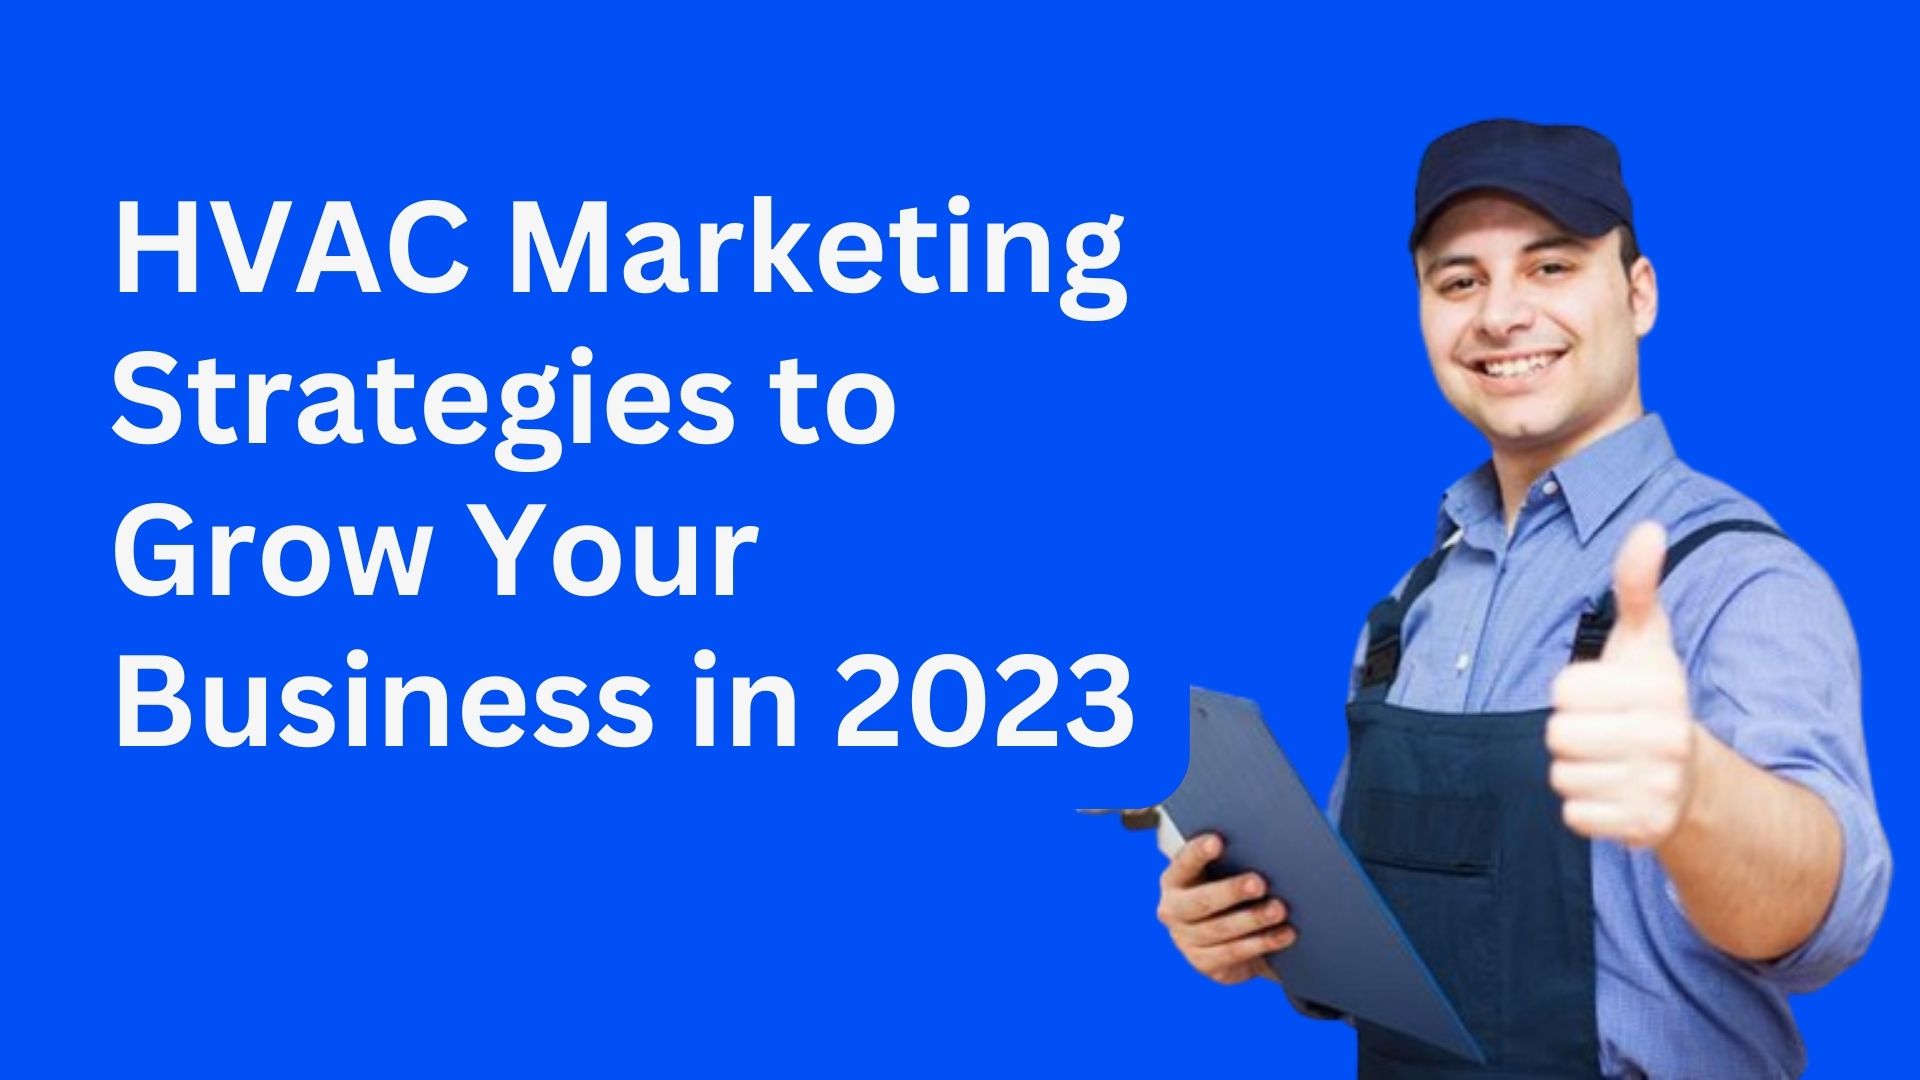 HVAC Marketing Strategies to Grow Your Business in 2023